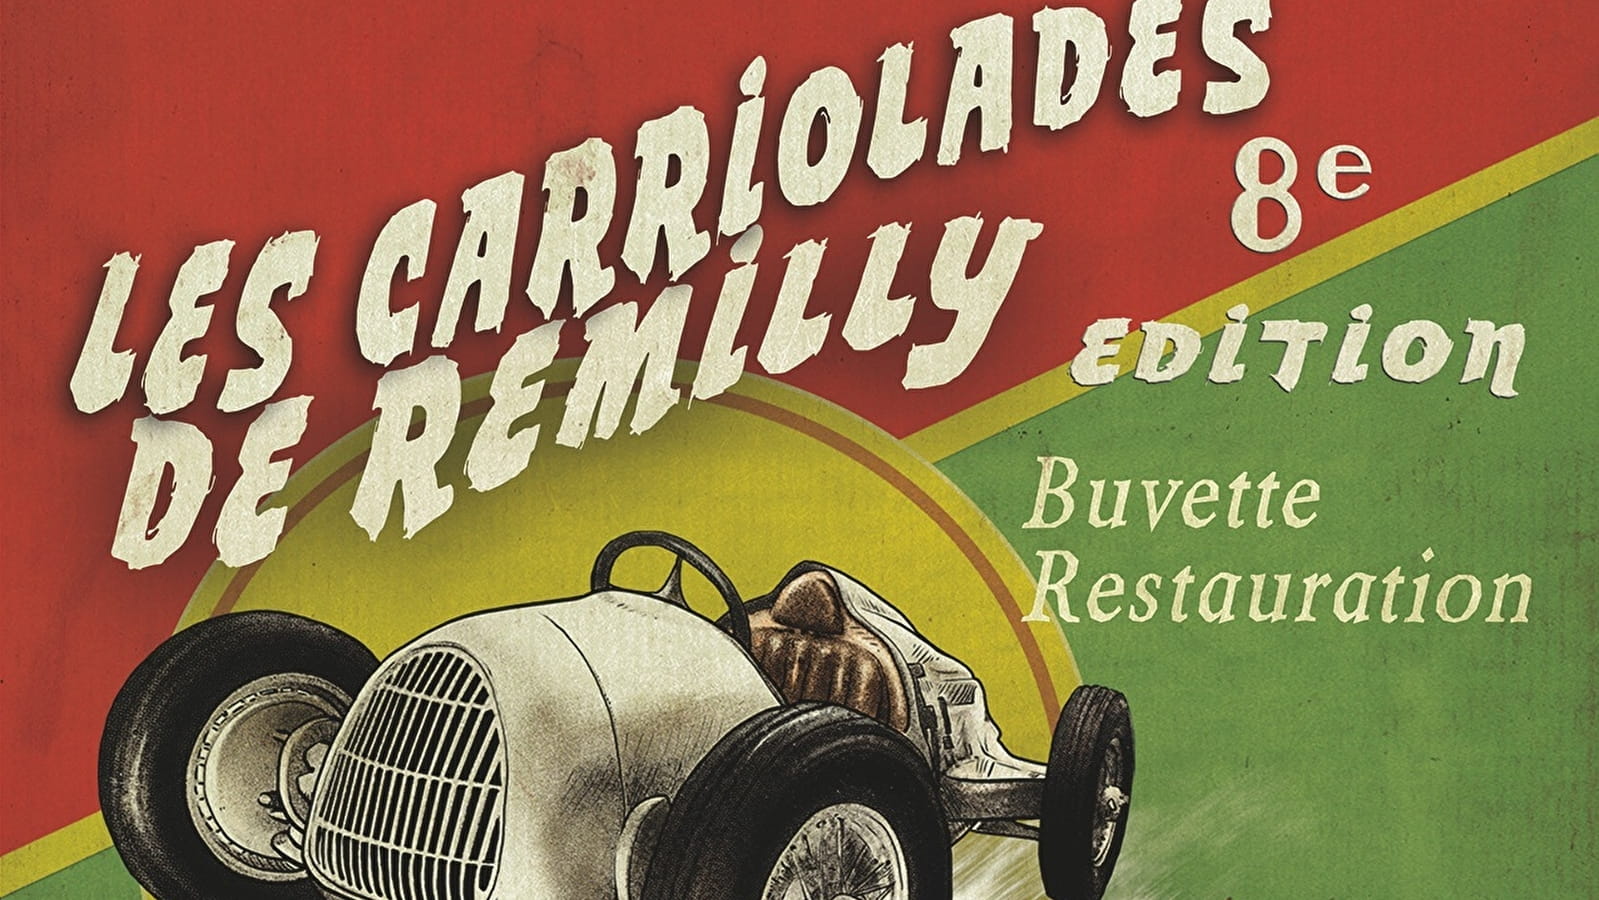 Les Carriolades de Remilly 8th edition